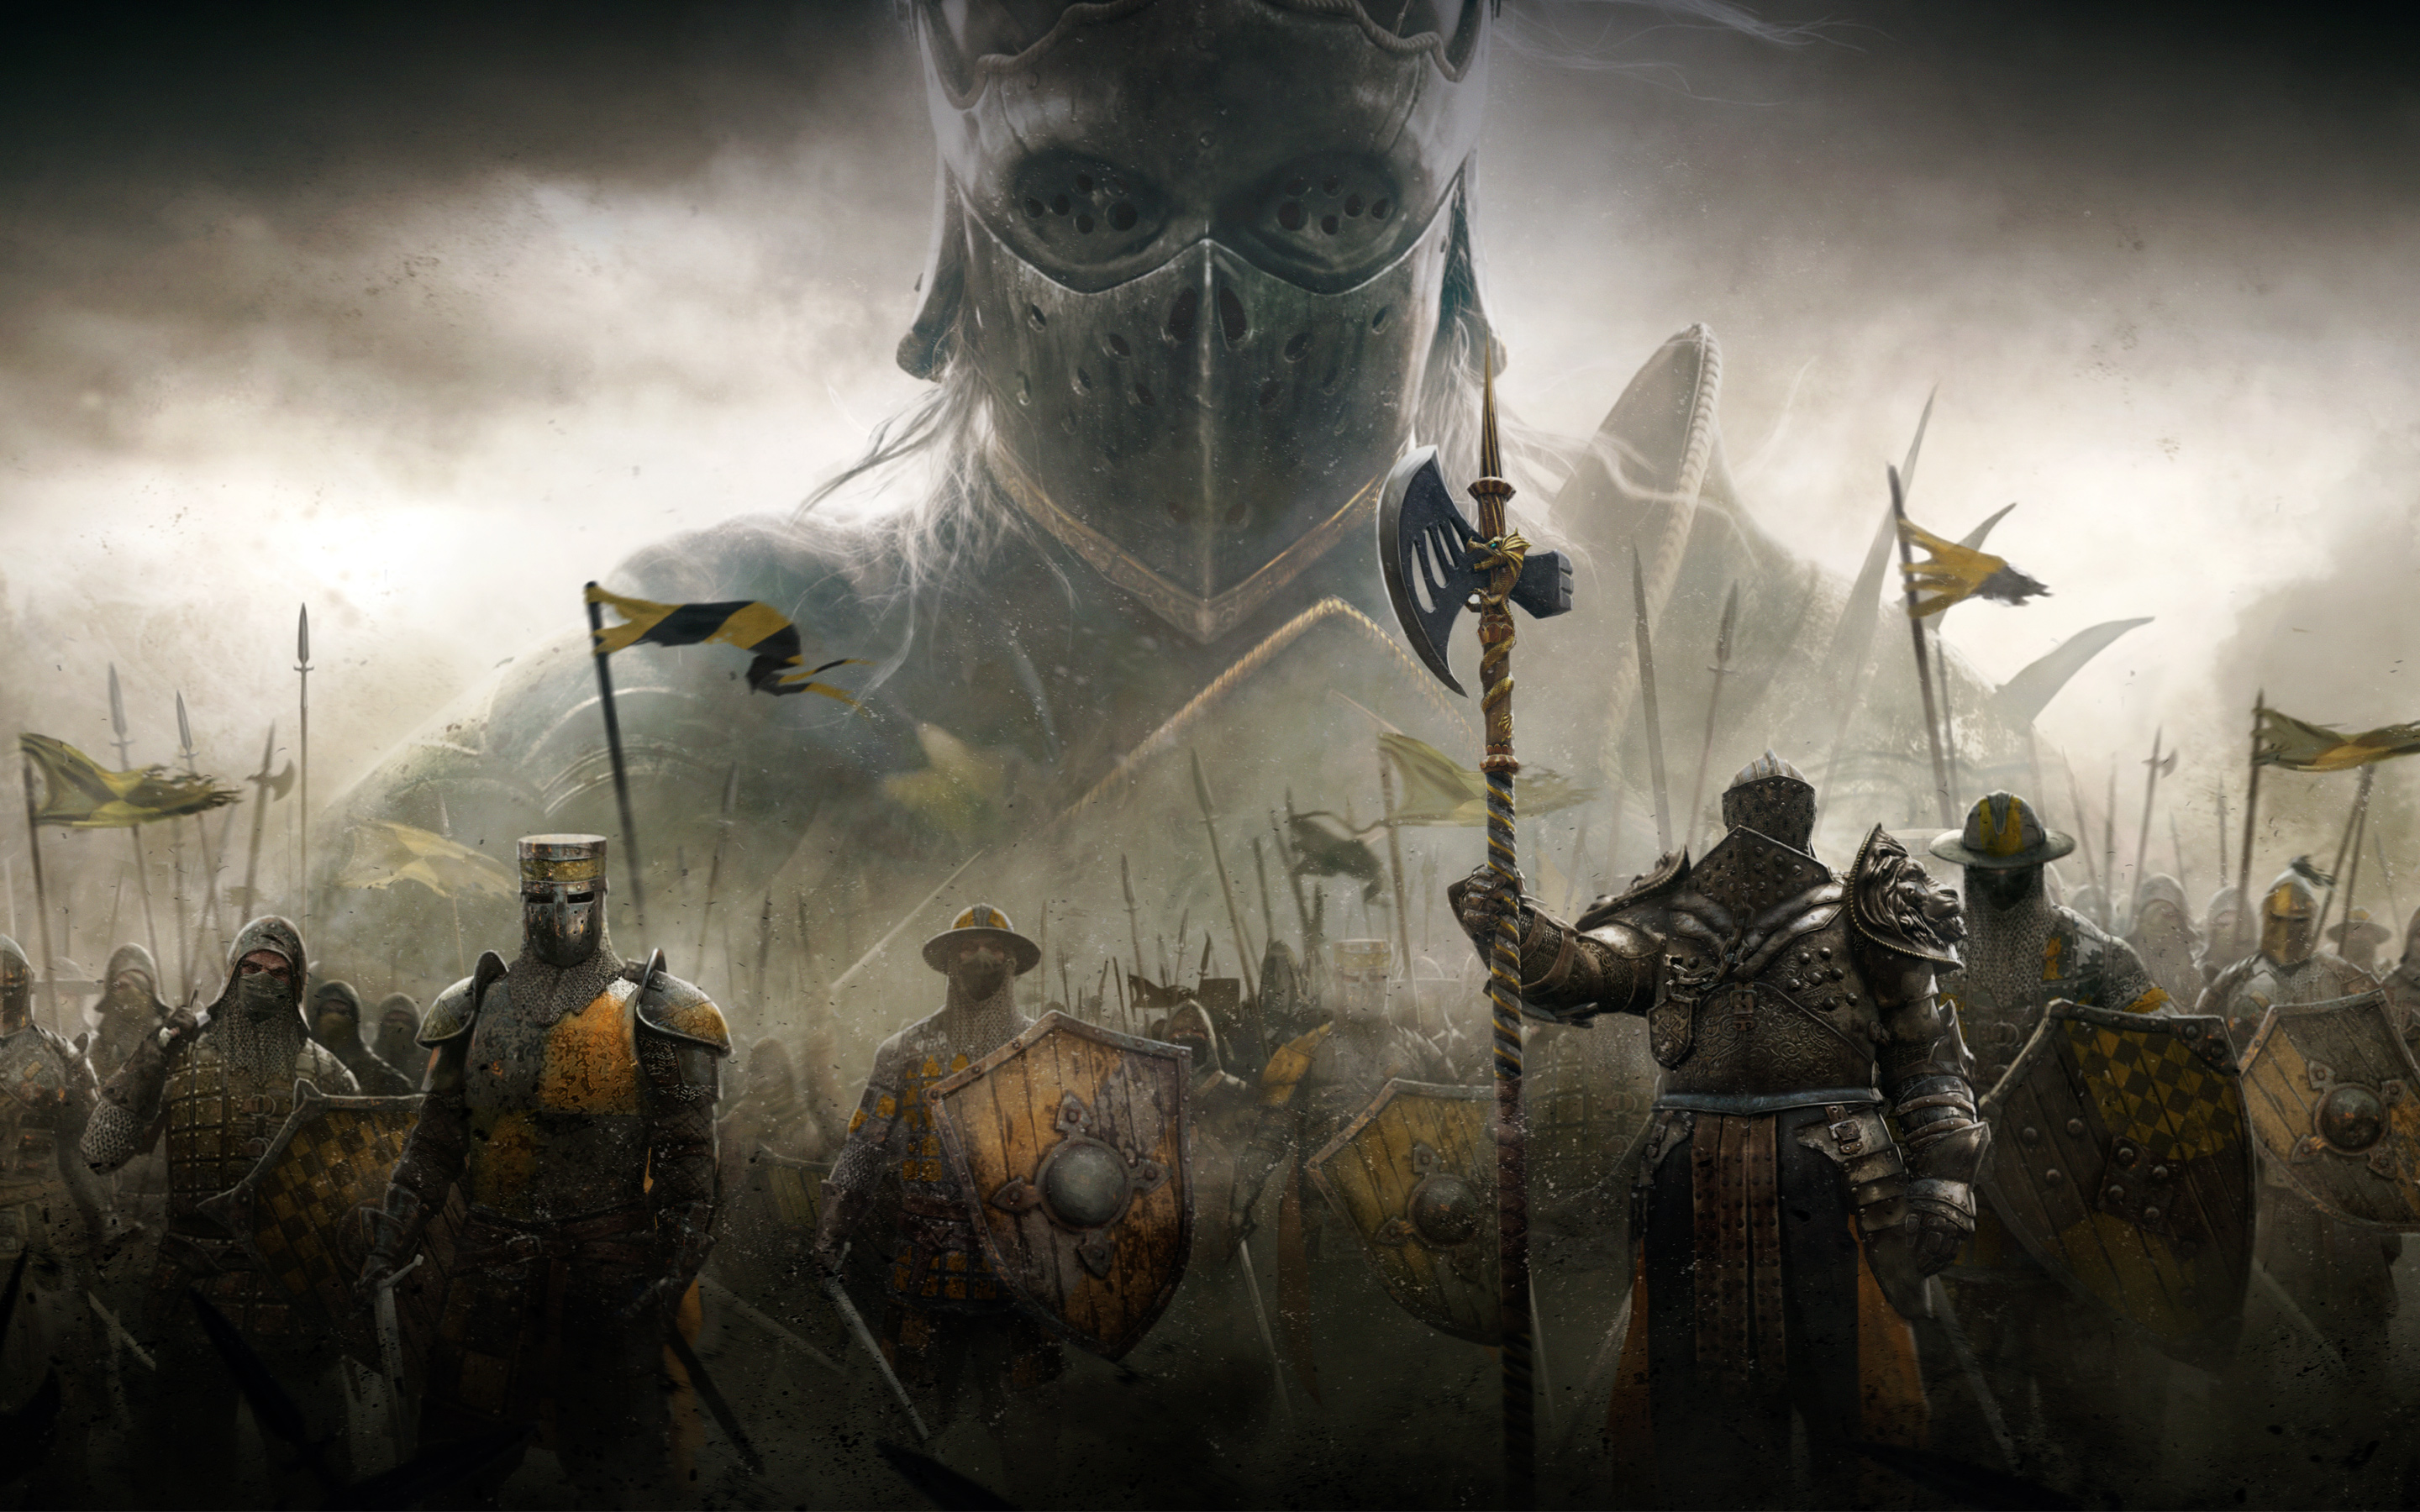 apollyon for honor download free